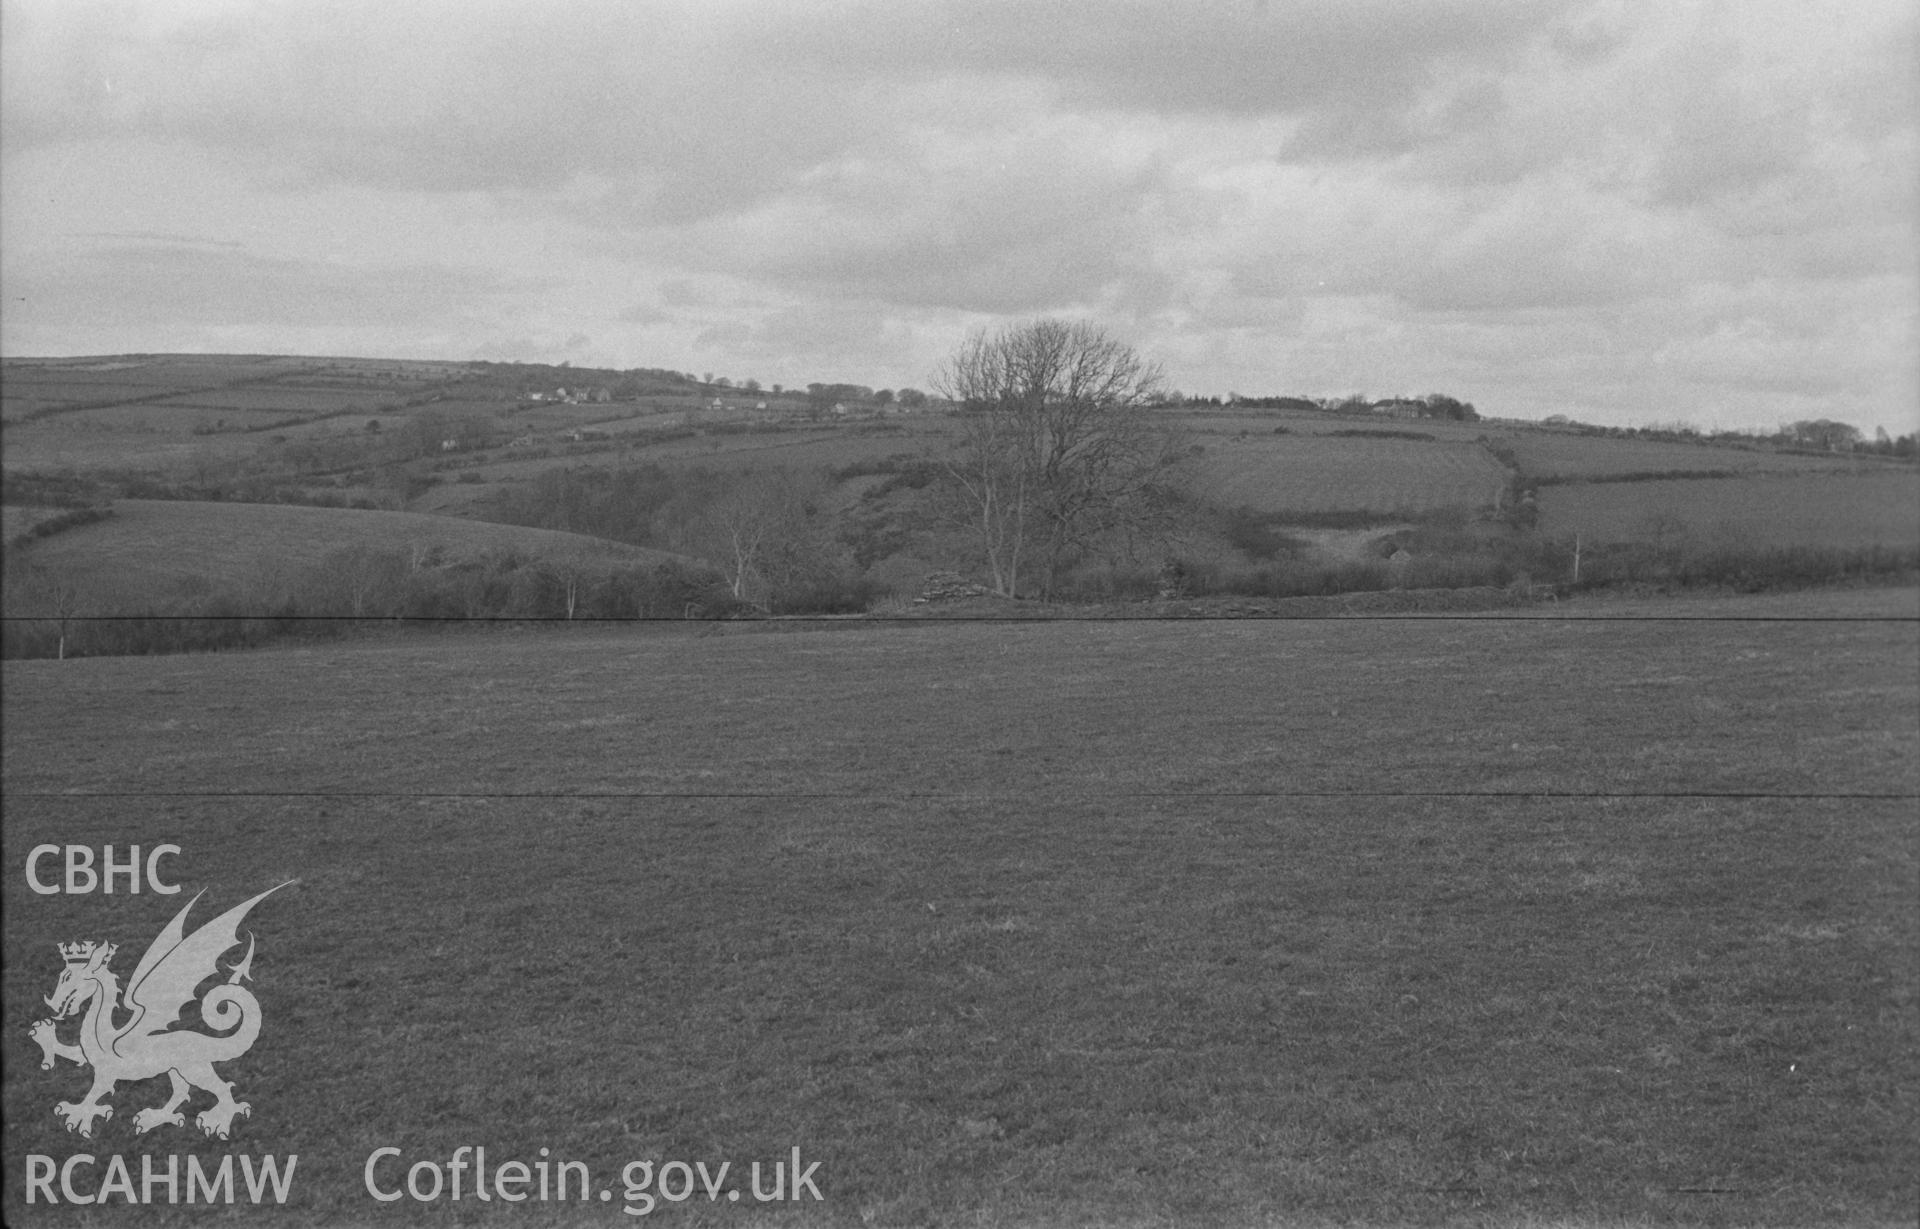 Digital copy of a black and white negative showing site of St Mary's church, Llanfair Trefhelygen, with the houses of Coed-y-Bryn in the distance. Photographed in April 1963 by Arthur O. Chater from Grid Reference SN 3430 4403, looking north east.